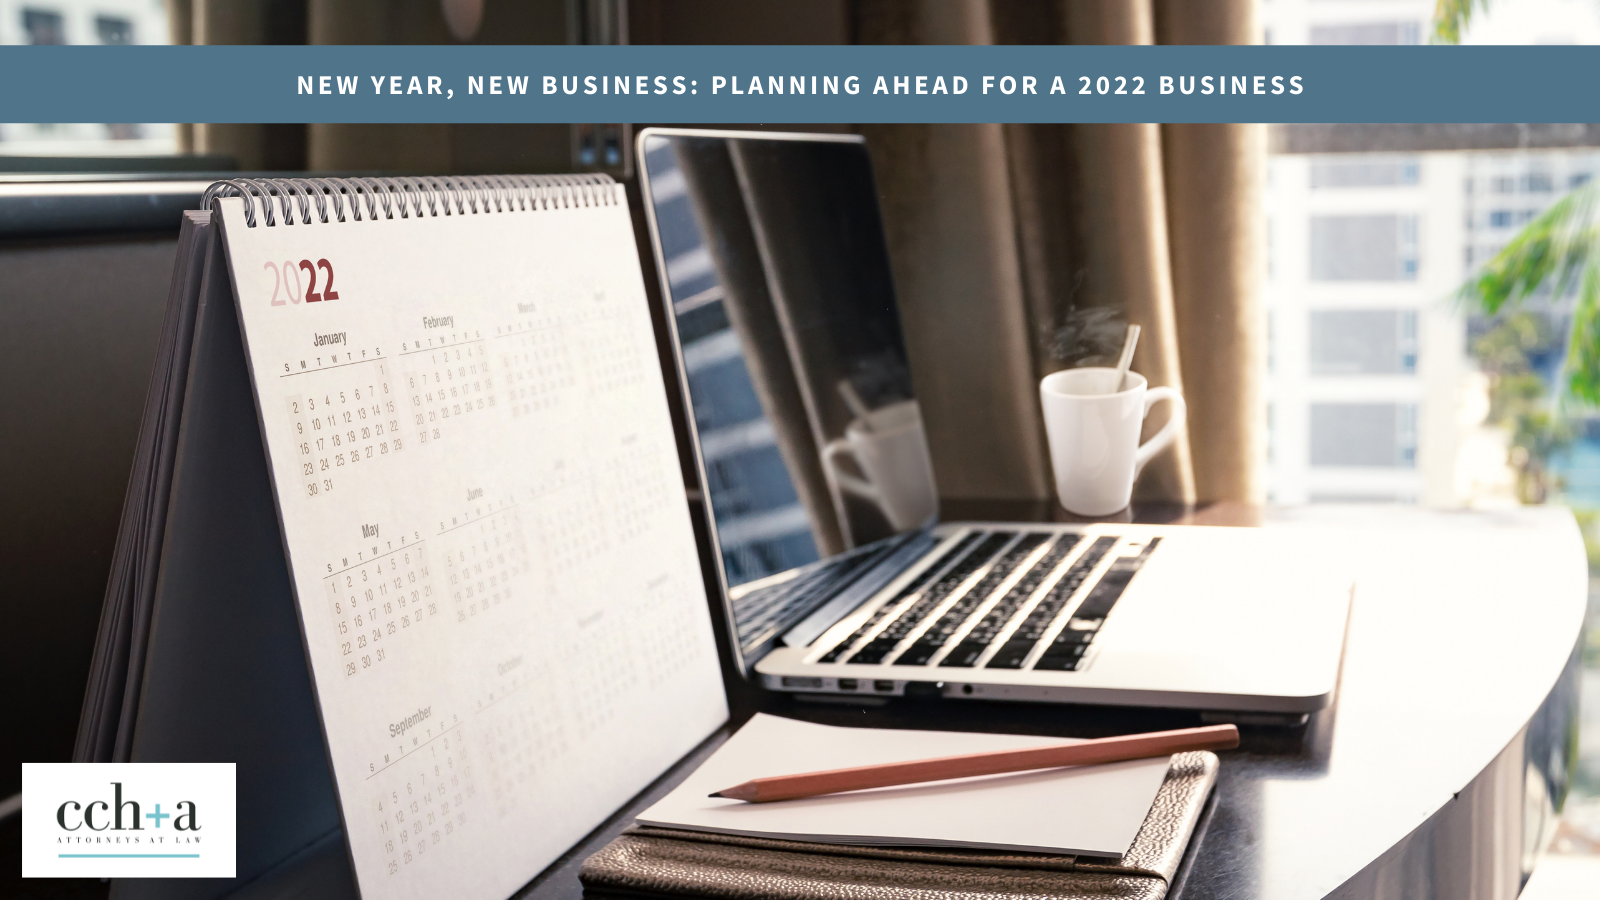 Ccha decemberr 2021 New Year New Business Planning Ahead for a 2022 Business blog twitter 1